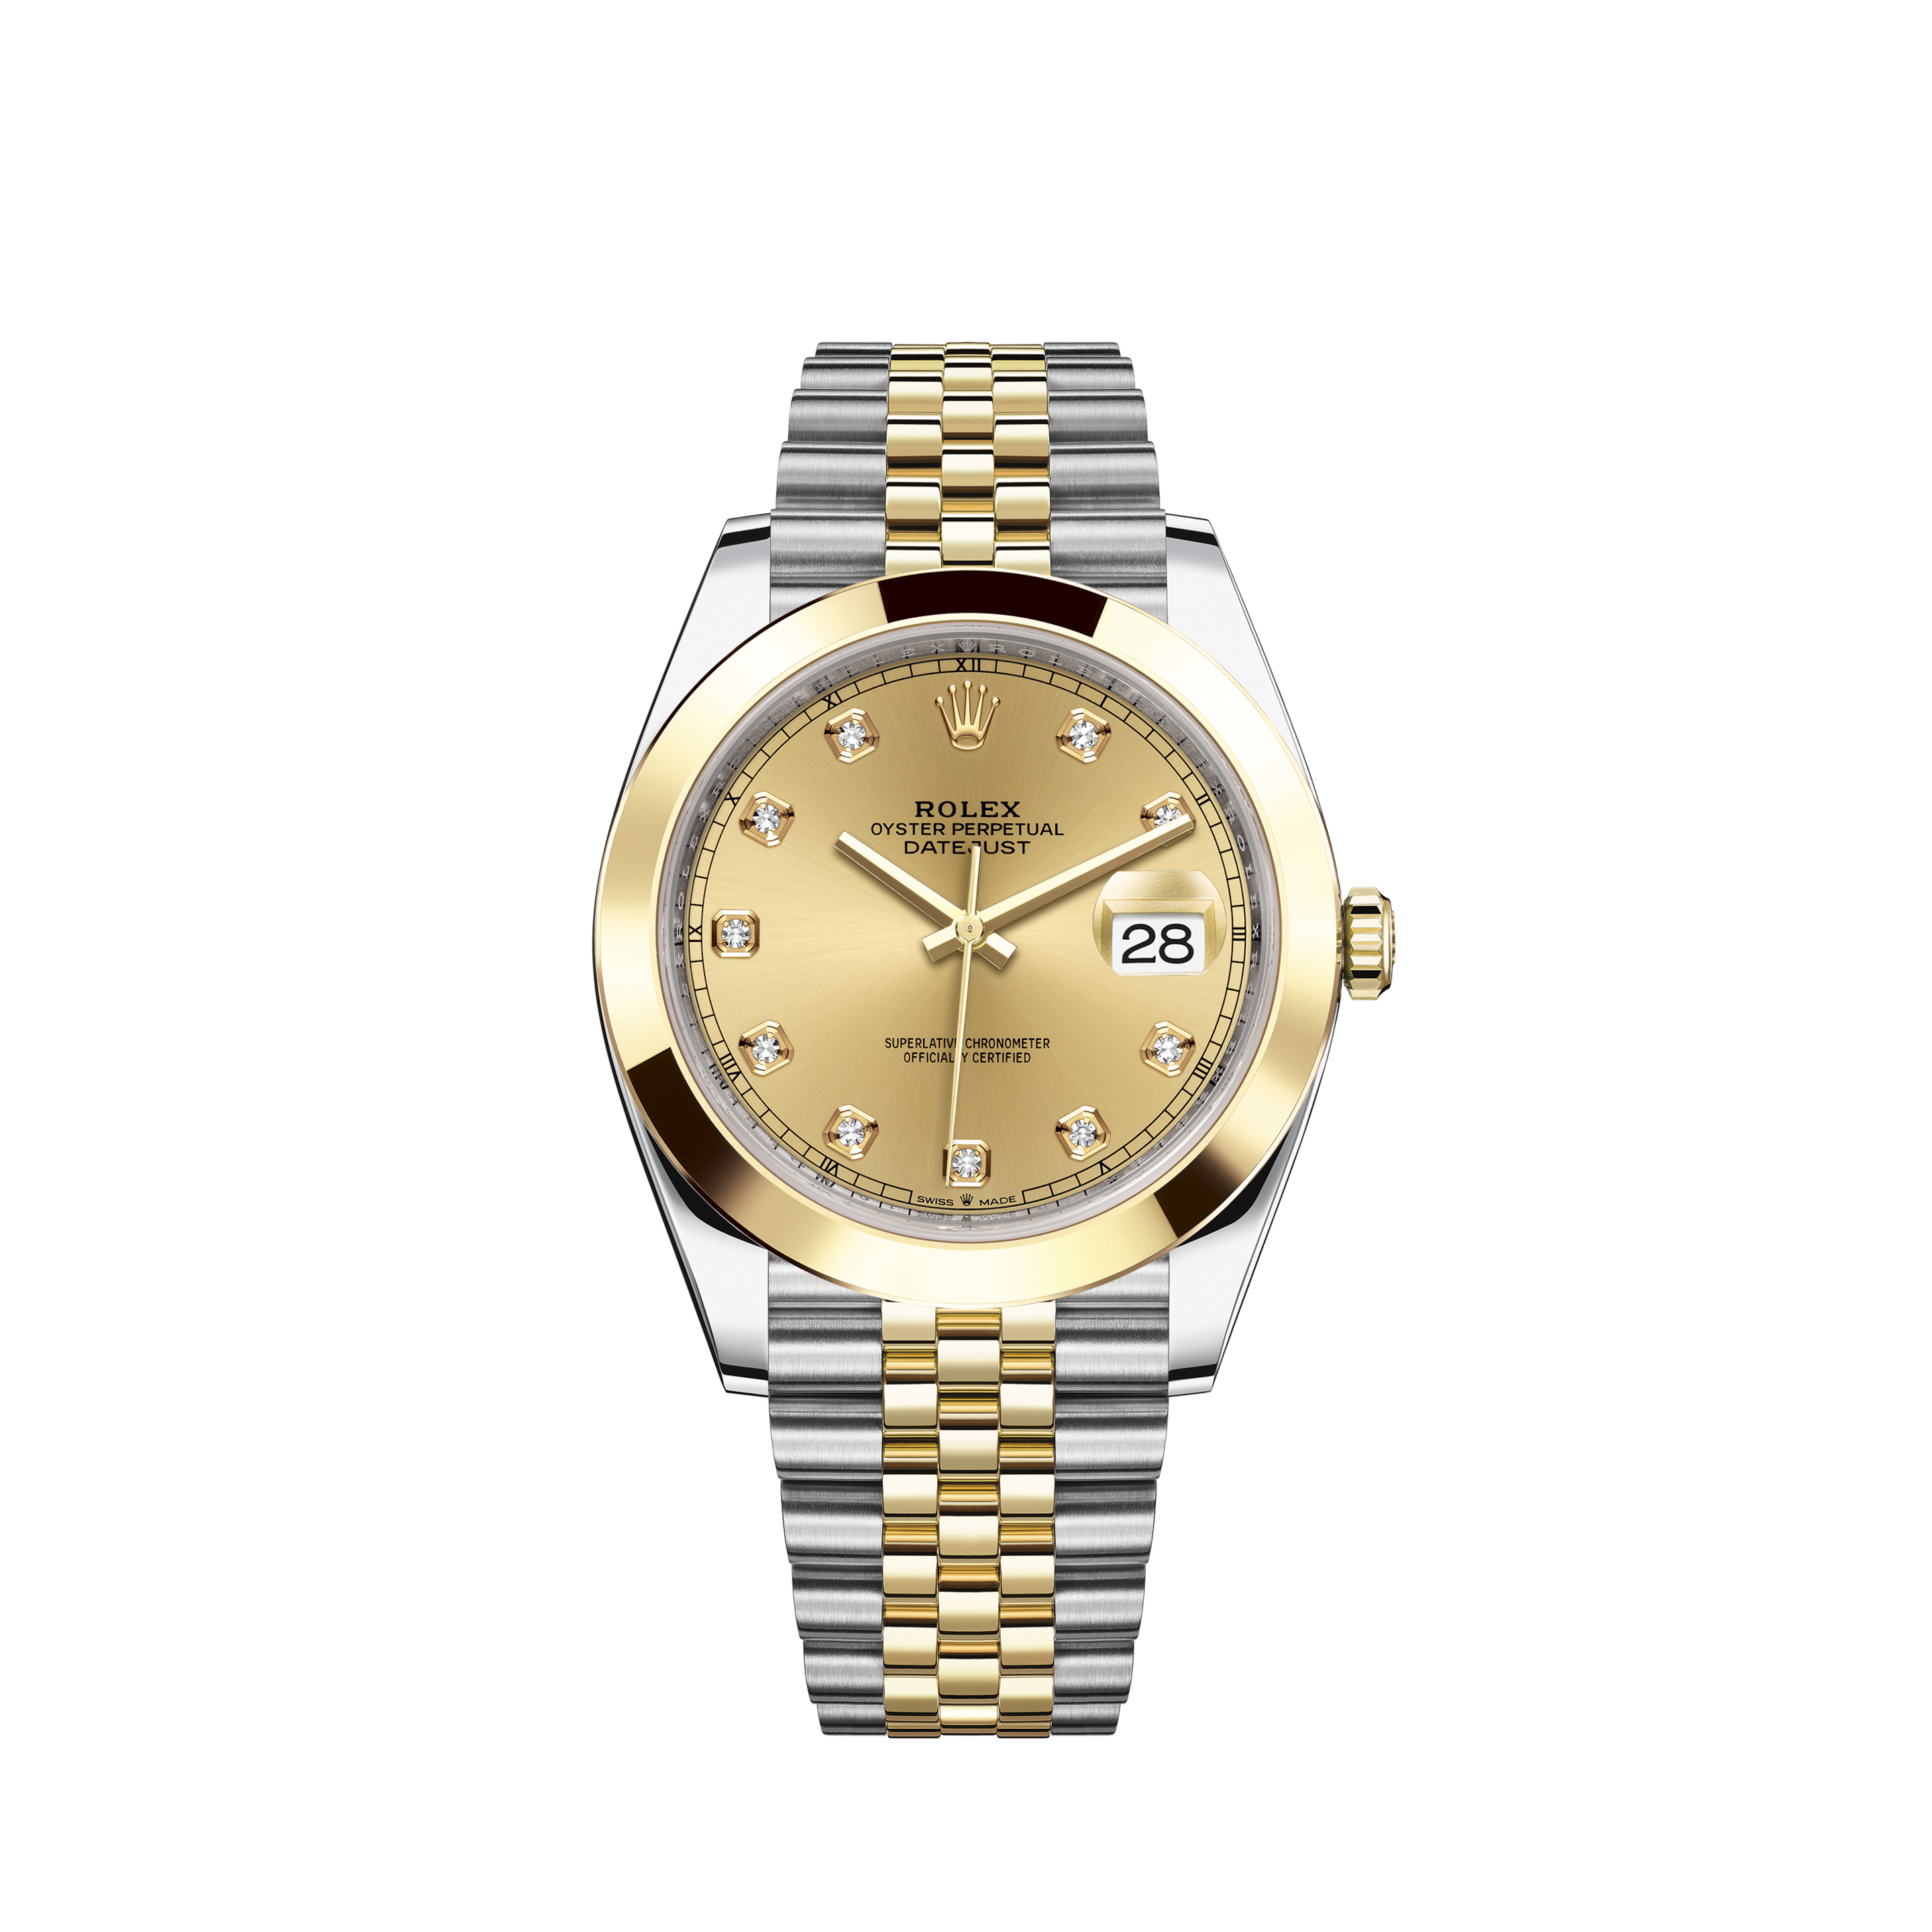 Rolex Datejust 26 Gold/Steel Jubilee Fluted Black Diamond DialRolex Datejust 26 Gold/Steel Jubilee Fluted Tapestry Dial